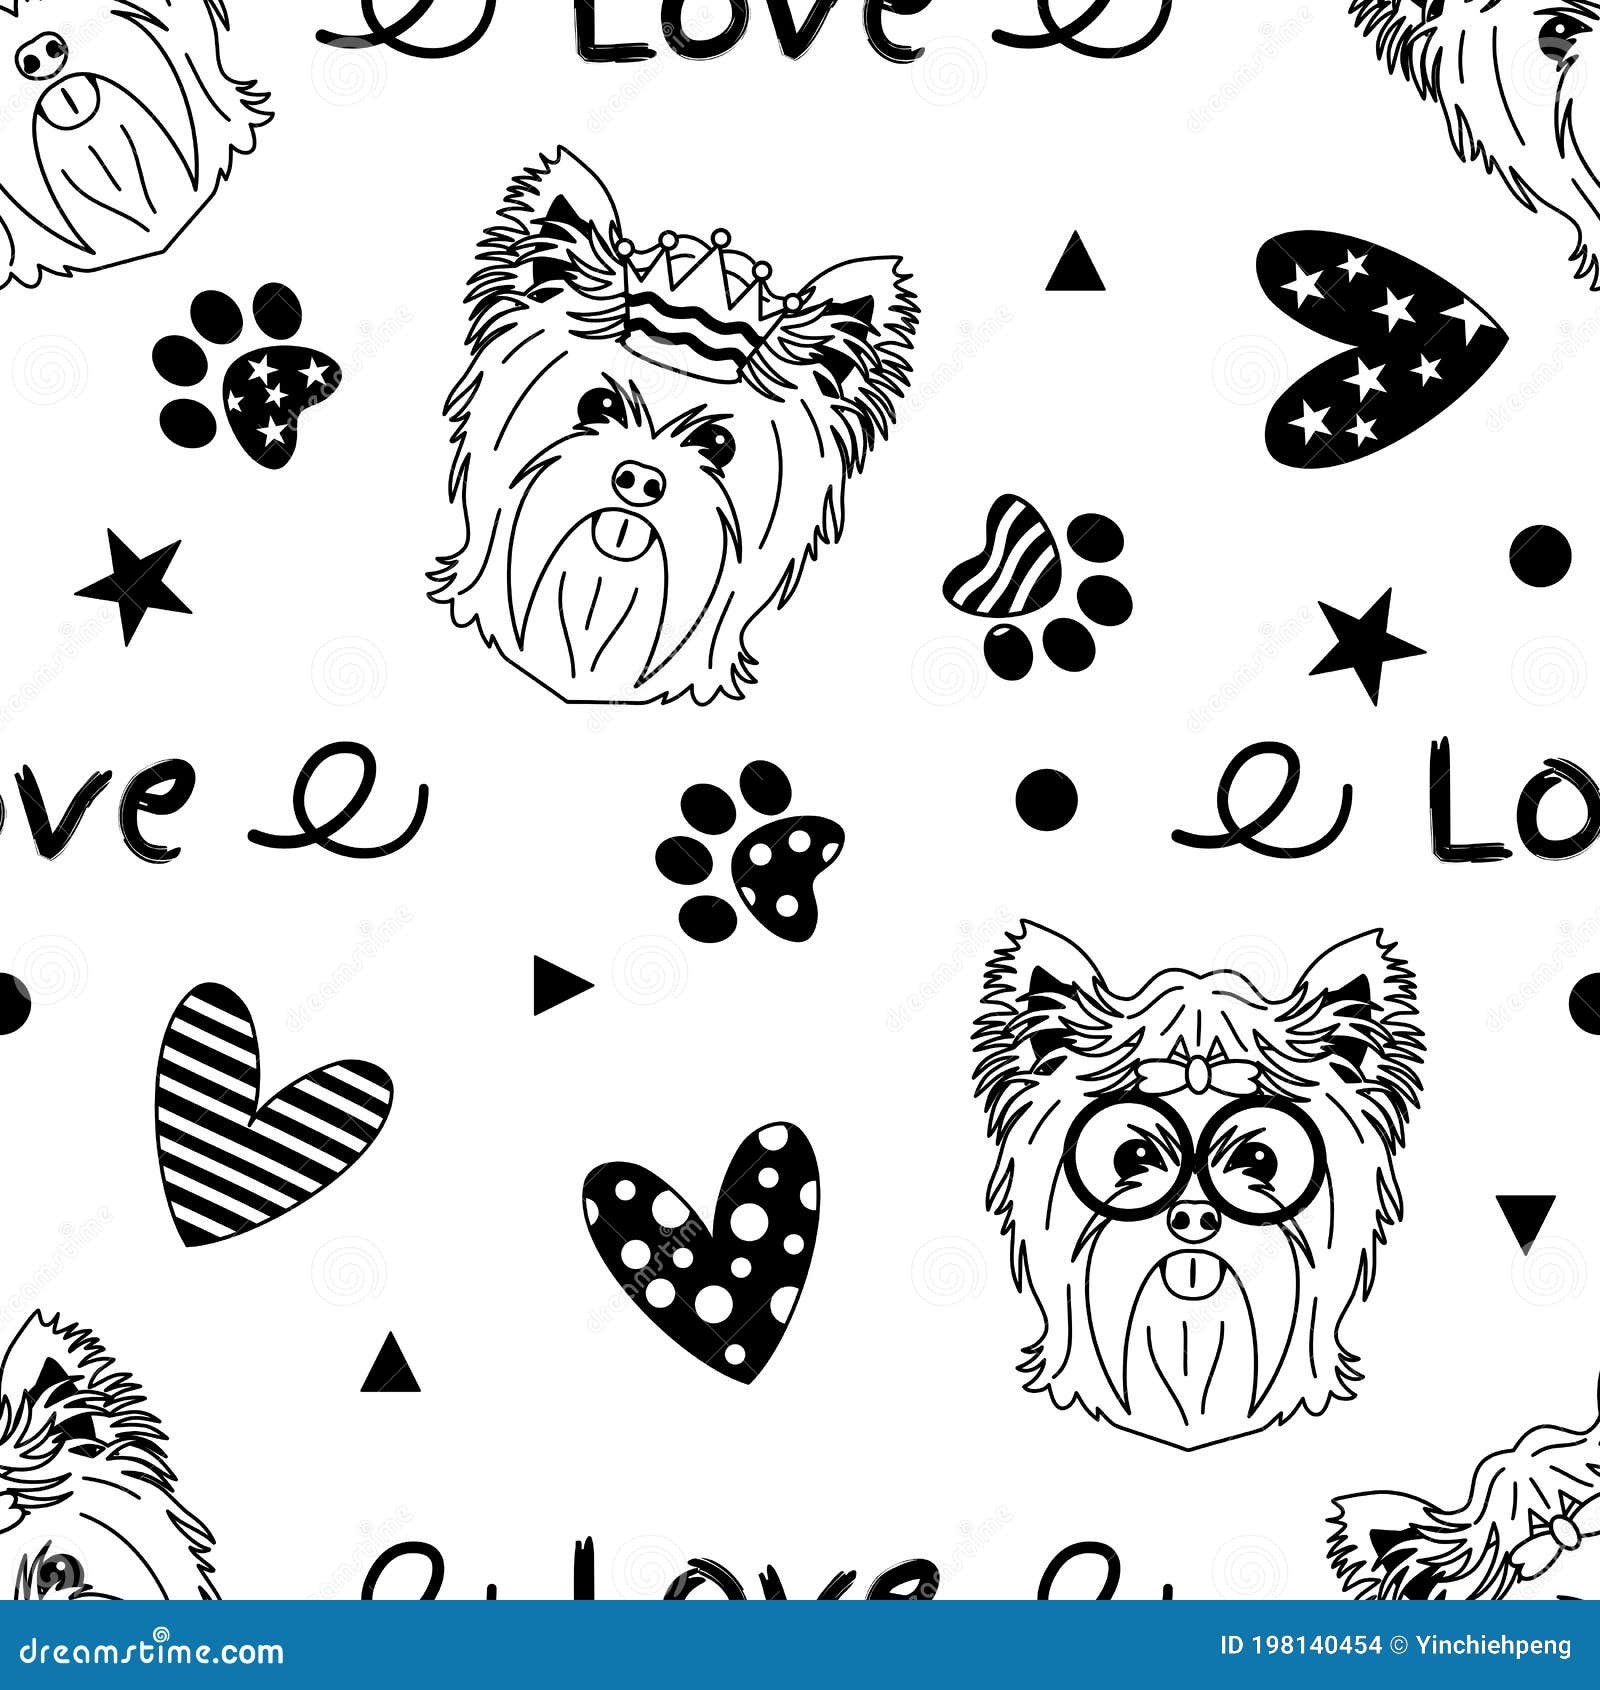 Doodle Yorkshire Head Seamless Pattern Background with Hearts, Paw Prints. Cartoon Yorkie Dog Puppy Background. Stock Illustration - Illustration of design, 198140454